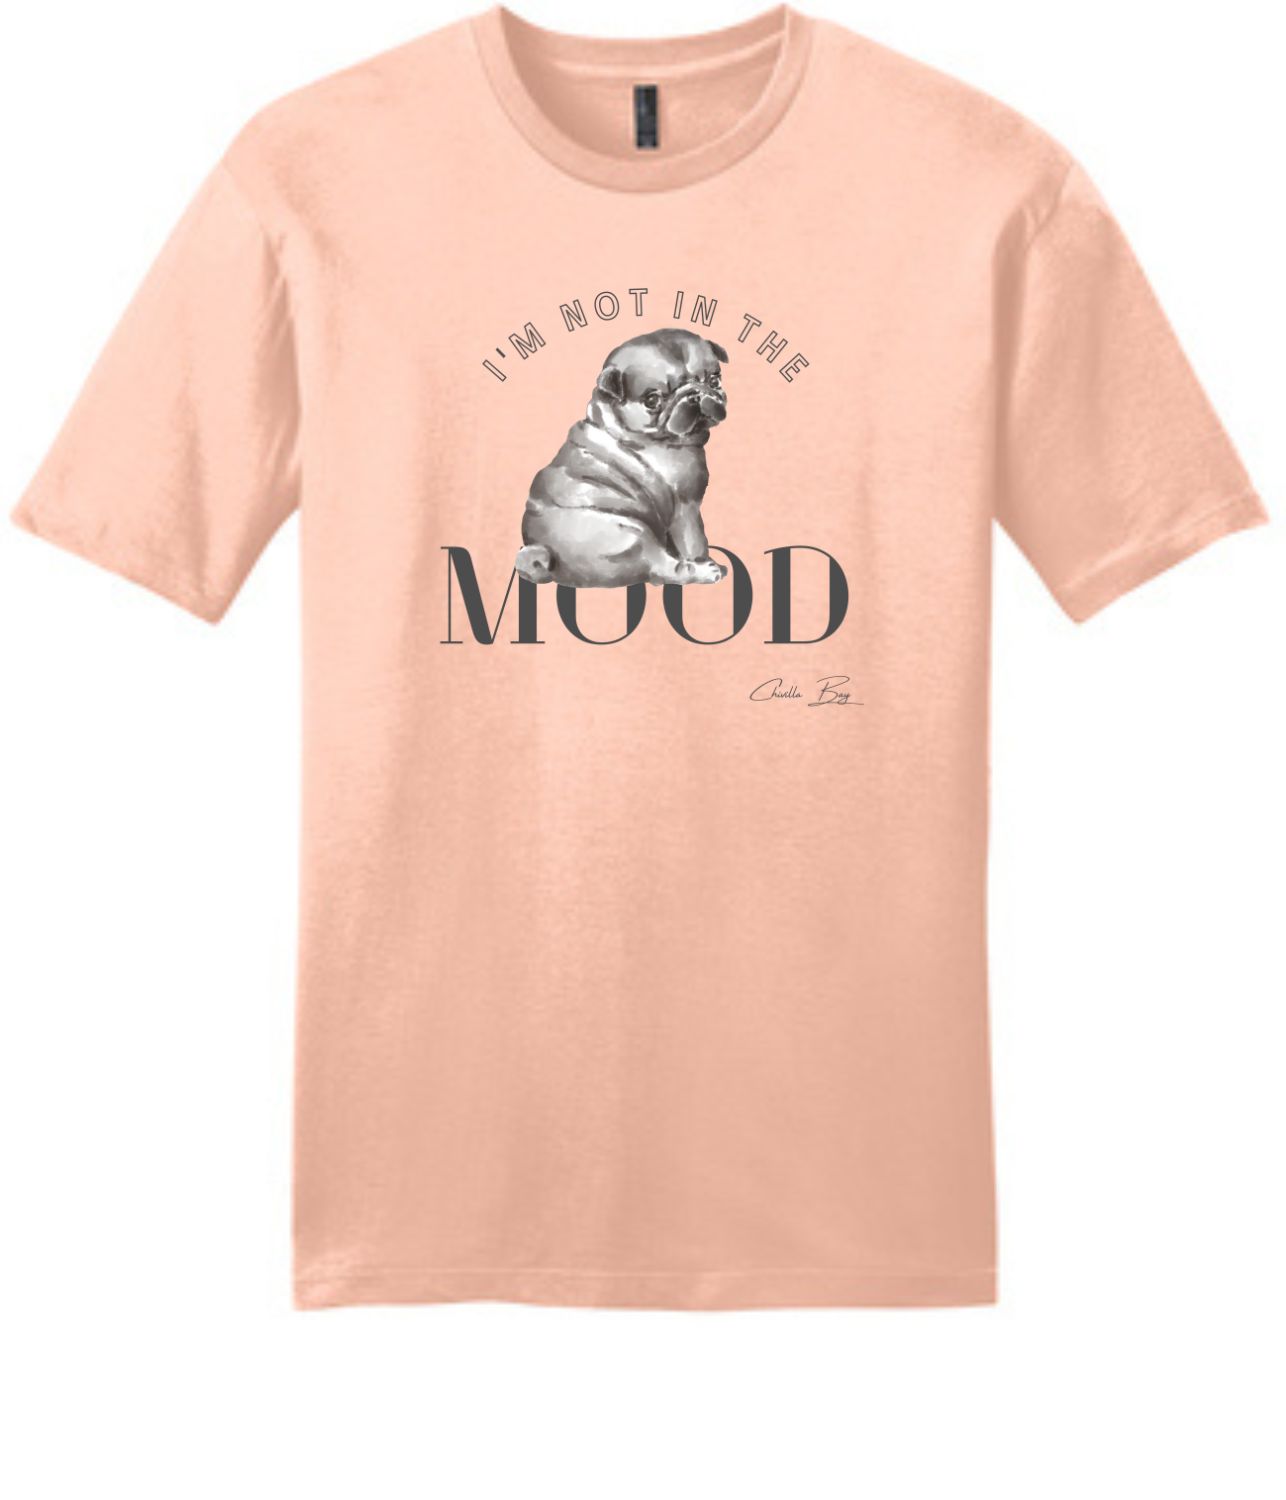 Tshirt - I'm not in the mood